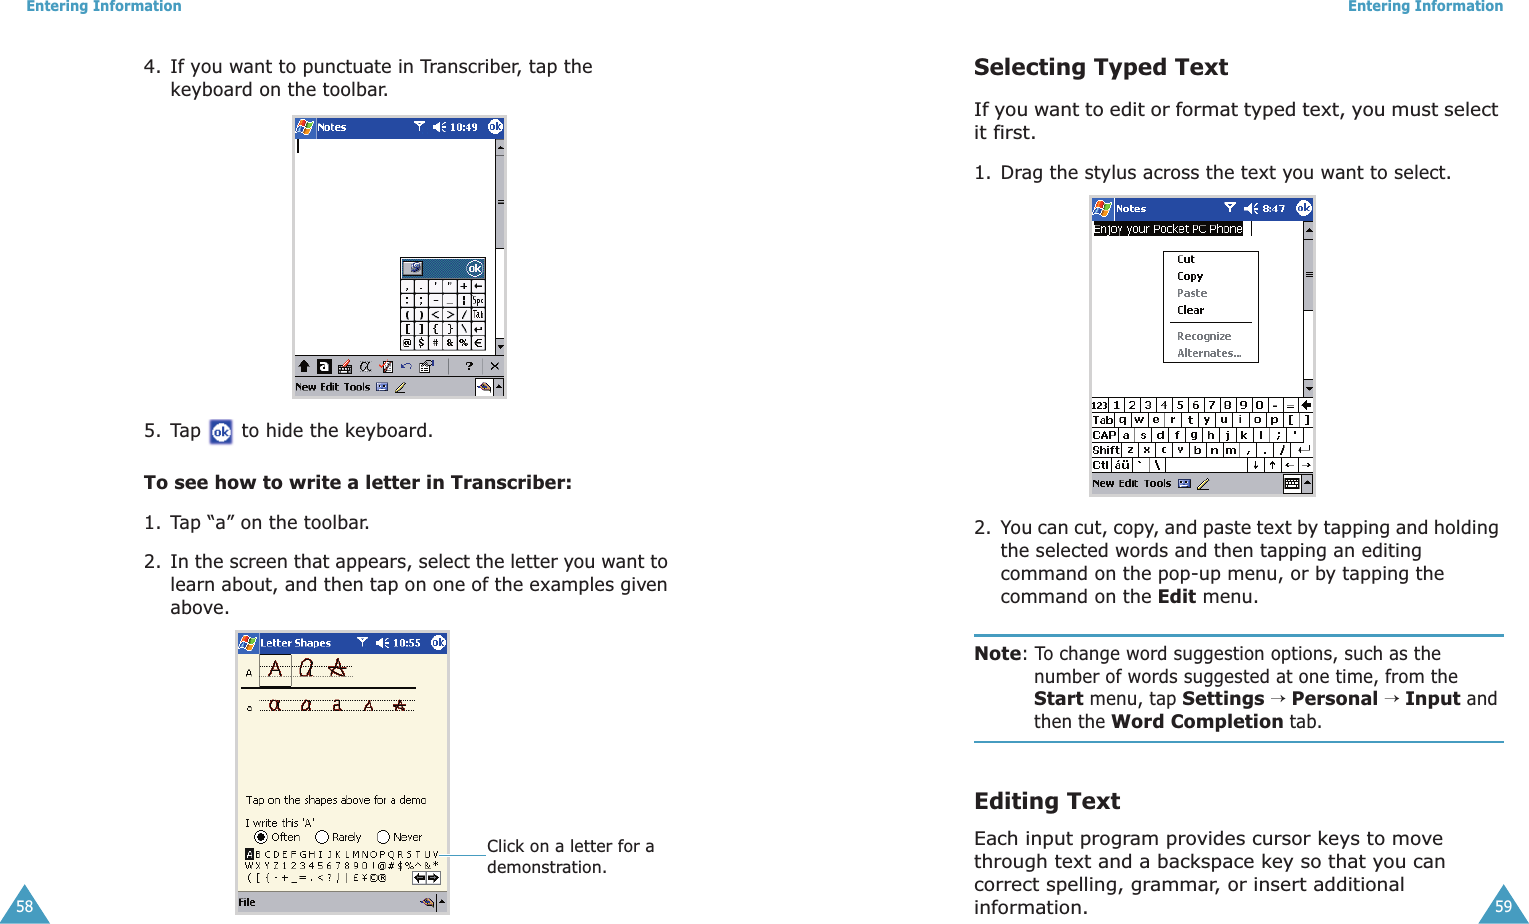 Entering Information584. If you want to punctuate in Transcriber, tap the keyboard on the toolbar. 5. Tap   to hide the keyboard.To see how to write a letter in Transcriber:1. Tap “a” on the toolbar.2. In the screen that appears, select the letter you want to learn about, and then tap on one of the examples given above. Click on a letter for a demonstration.Entering Information59Selecting Typed TextIf you want to edit or format typed text, you must select it first.1. Drag the stylus across the text you want to select. 2. You can cut, copy, and paste text by tapping and holding the selected words and then tapping an editing command on the pop-up menu, or by tapping the command on the Edit menu.Note: To change word suggestion options, such as the number of words suggested at one time, from the Start menu, tap Settings → Personal → Input and then the Word Completion tab.Editing TextEach input program provides cursor keys to move through text and a backspace key so that you can correct spelling, grammar, or insert additional information.